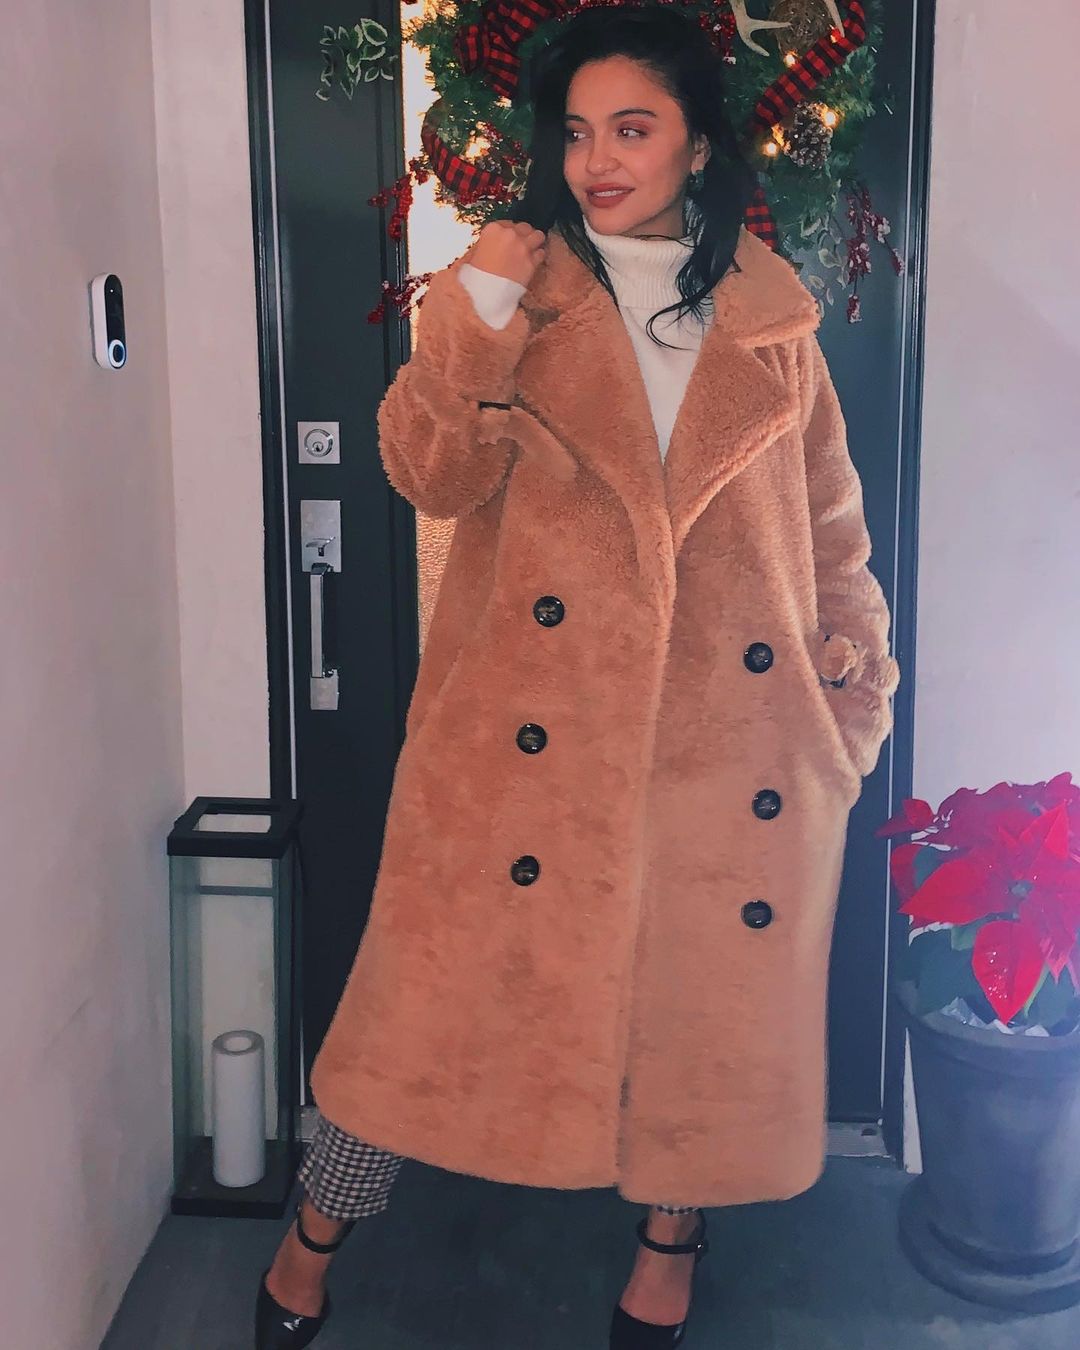 Stella Slays The Winter Look In A Double-Breasted Teddy Overcoat